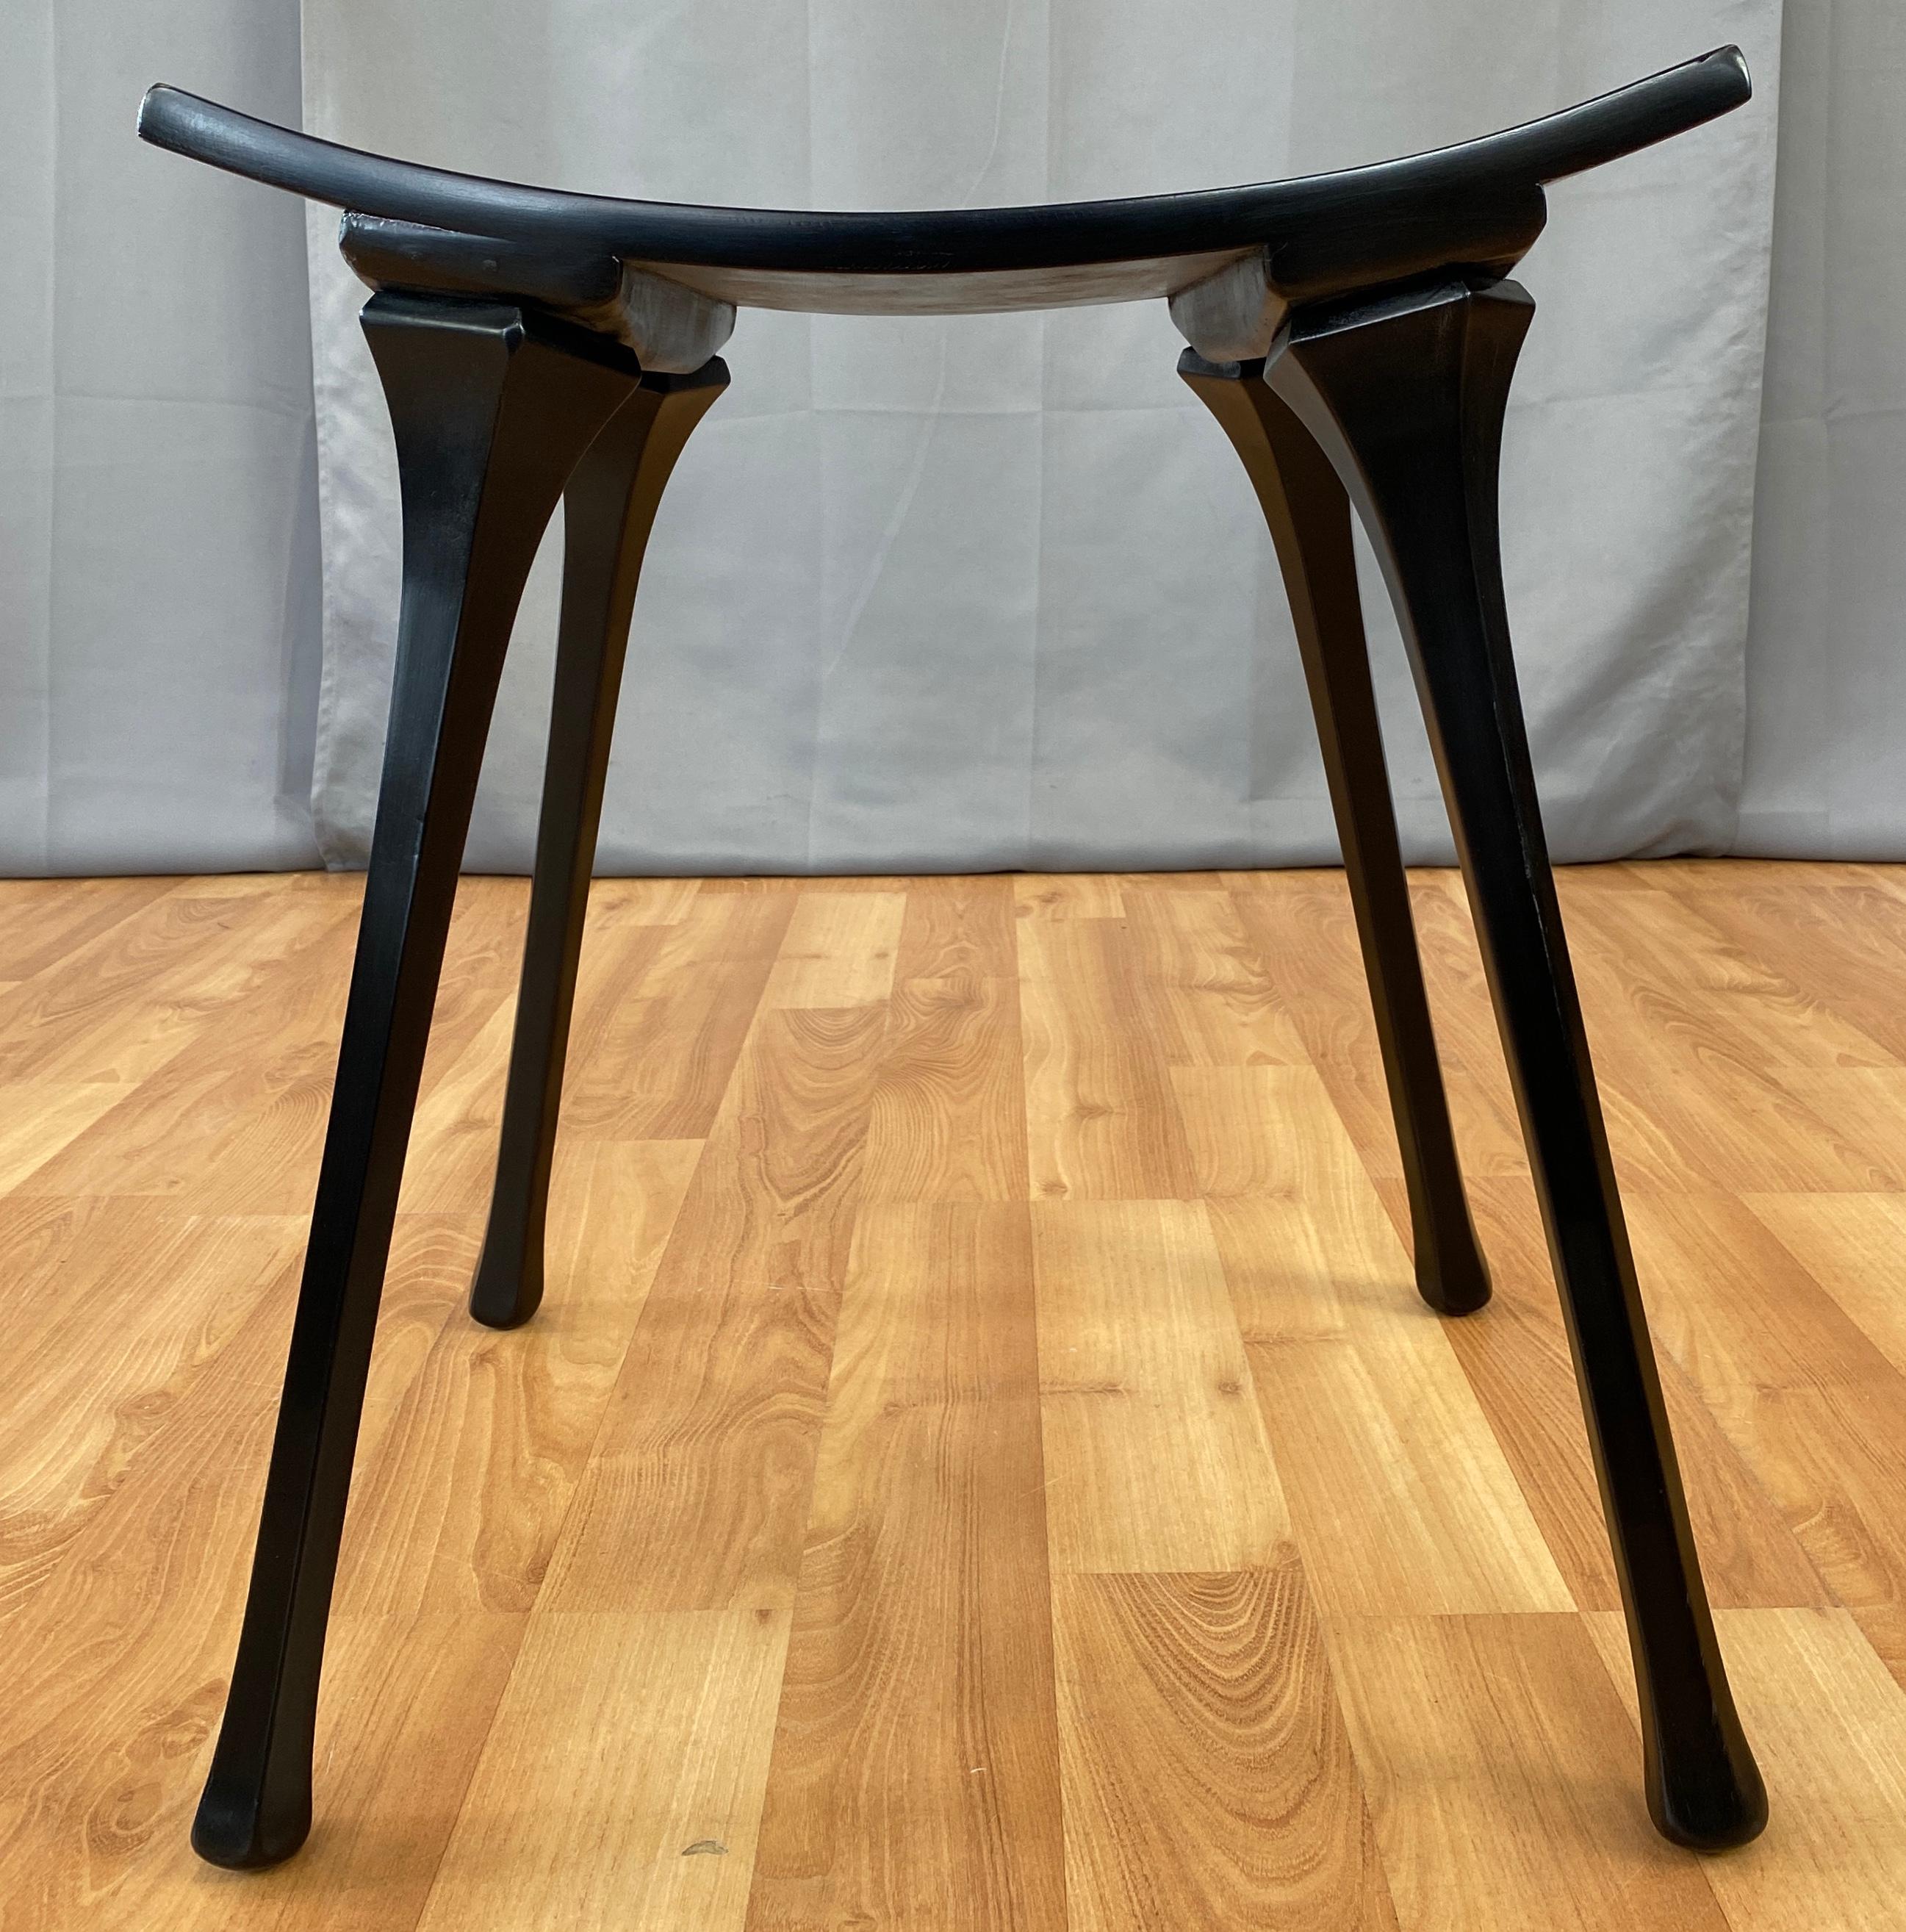 Old School Glam Black Wooden Stool circa 1940s/50s For Sale 1